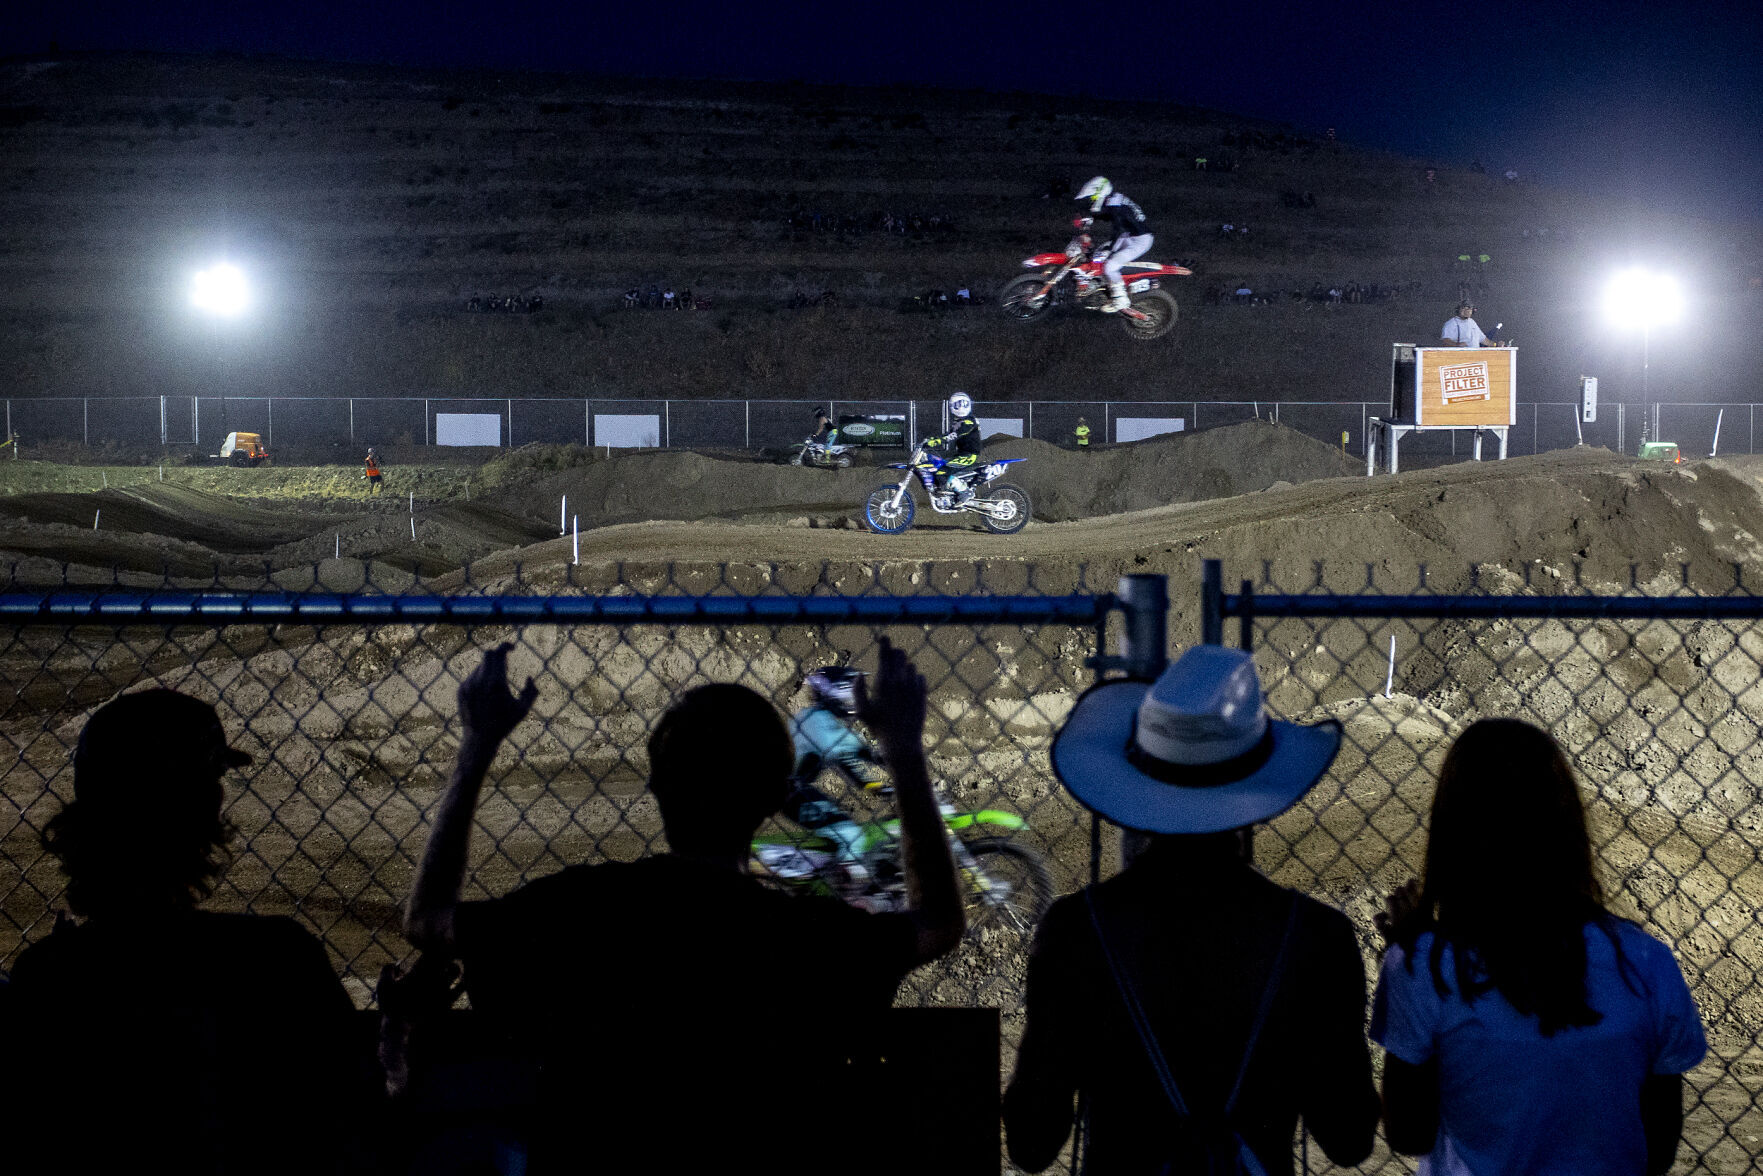 Breece sweeps through the valley at Supercross event Sports dnews